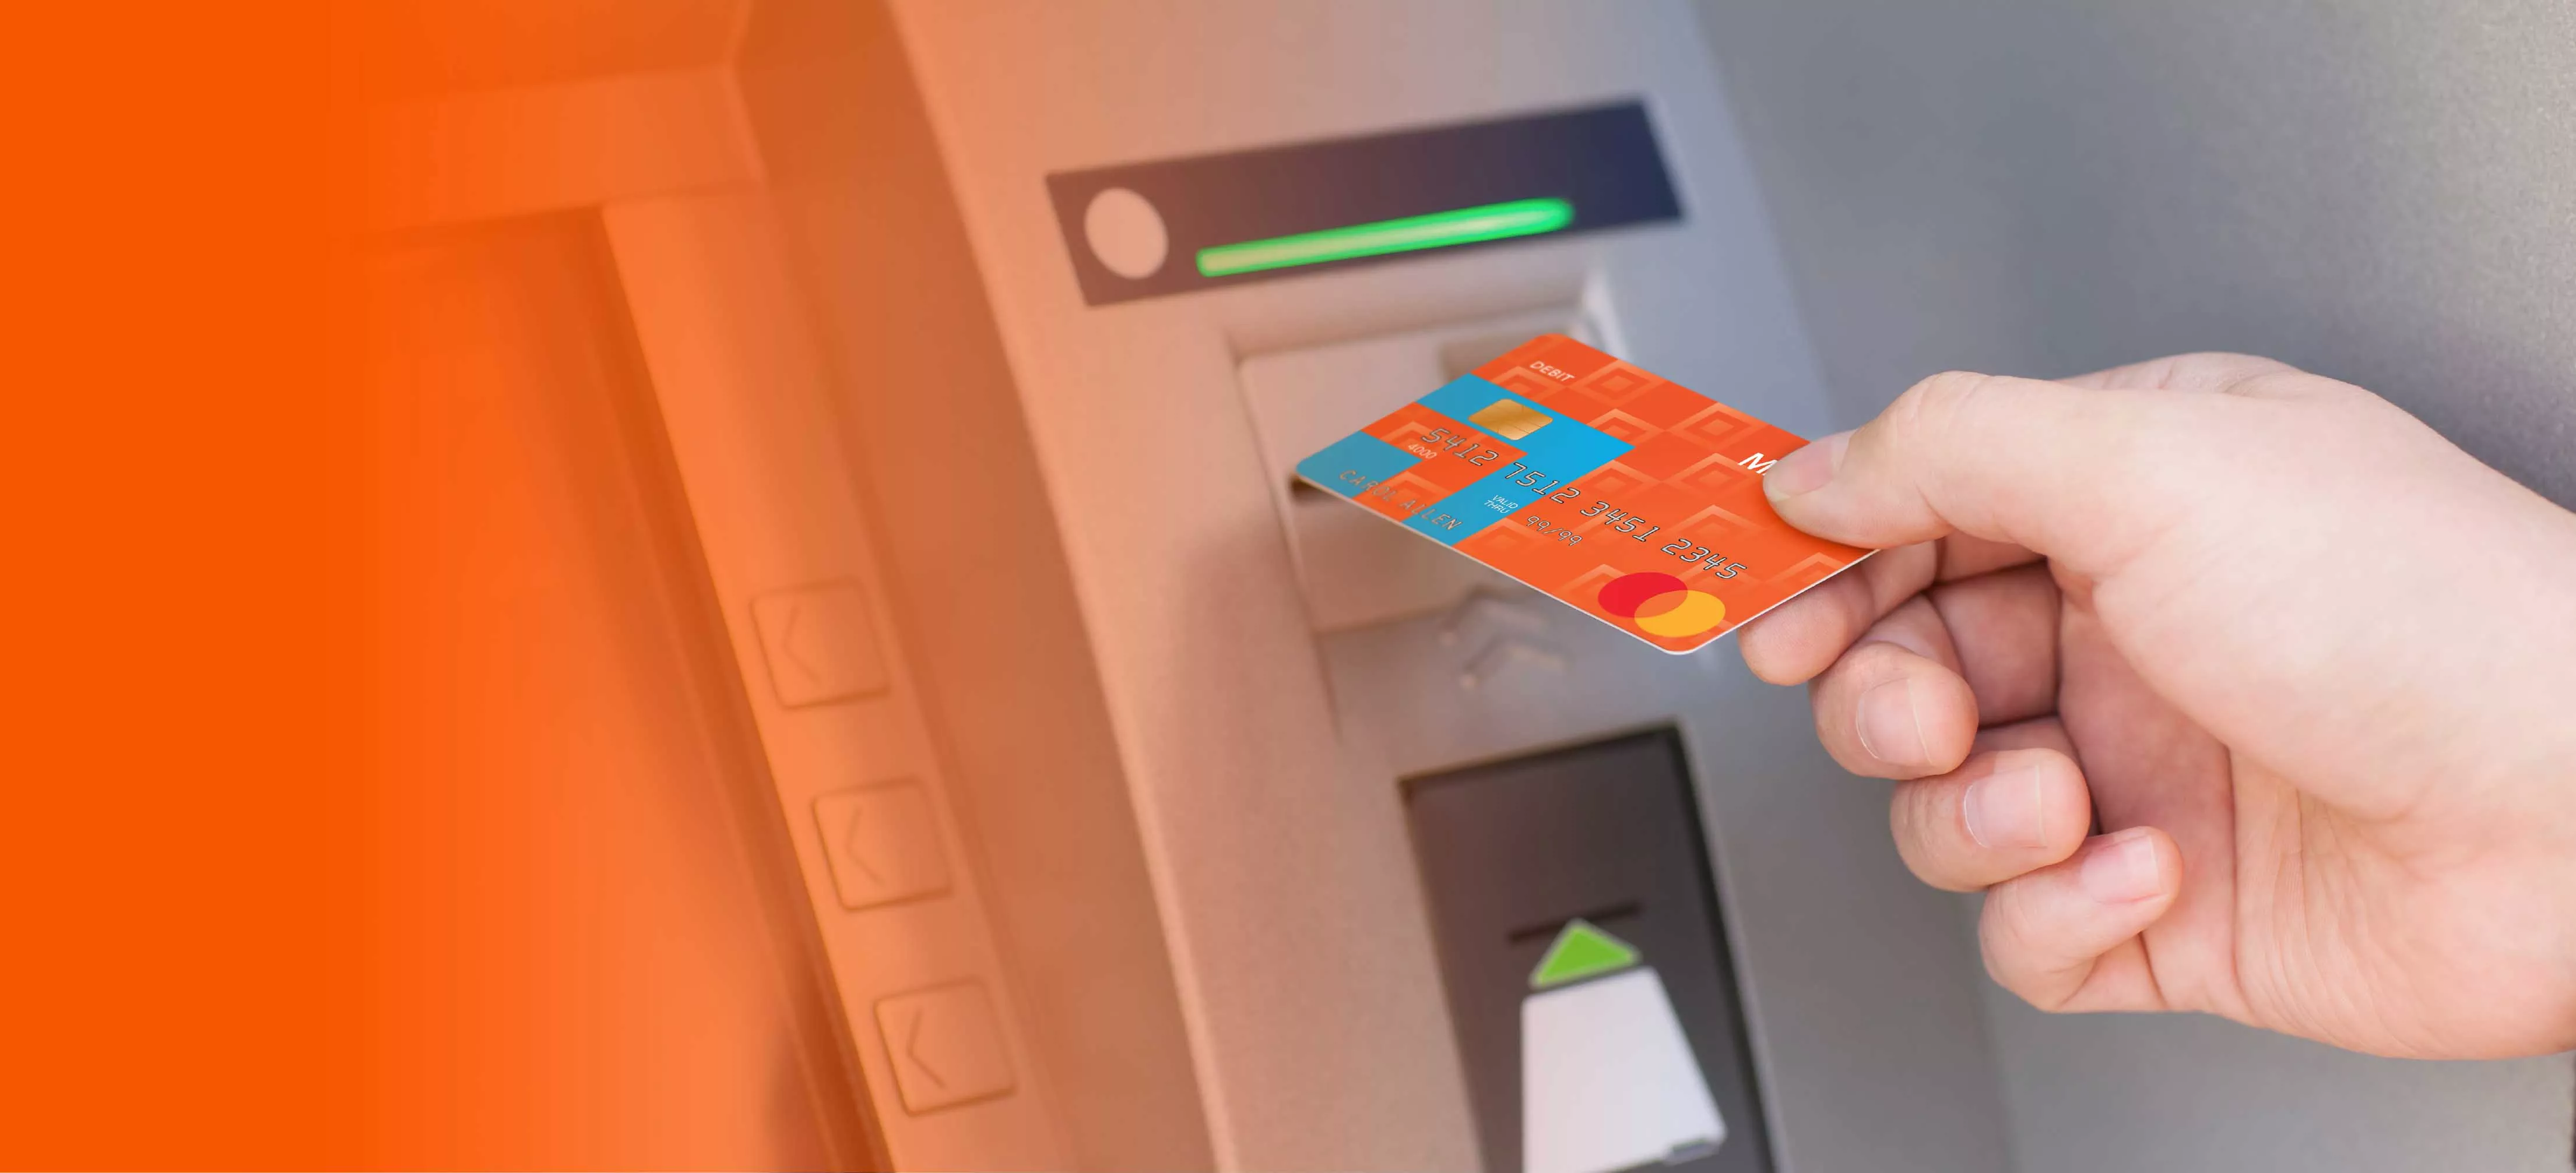 hand placing a midland card into the atm